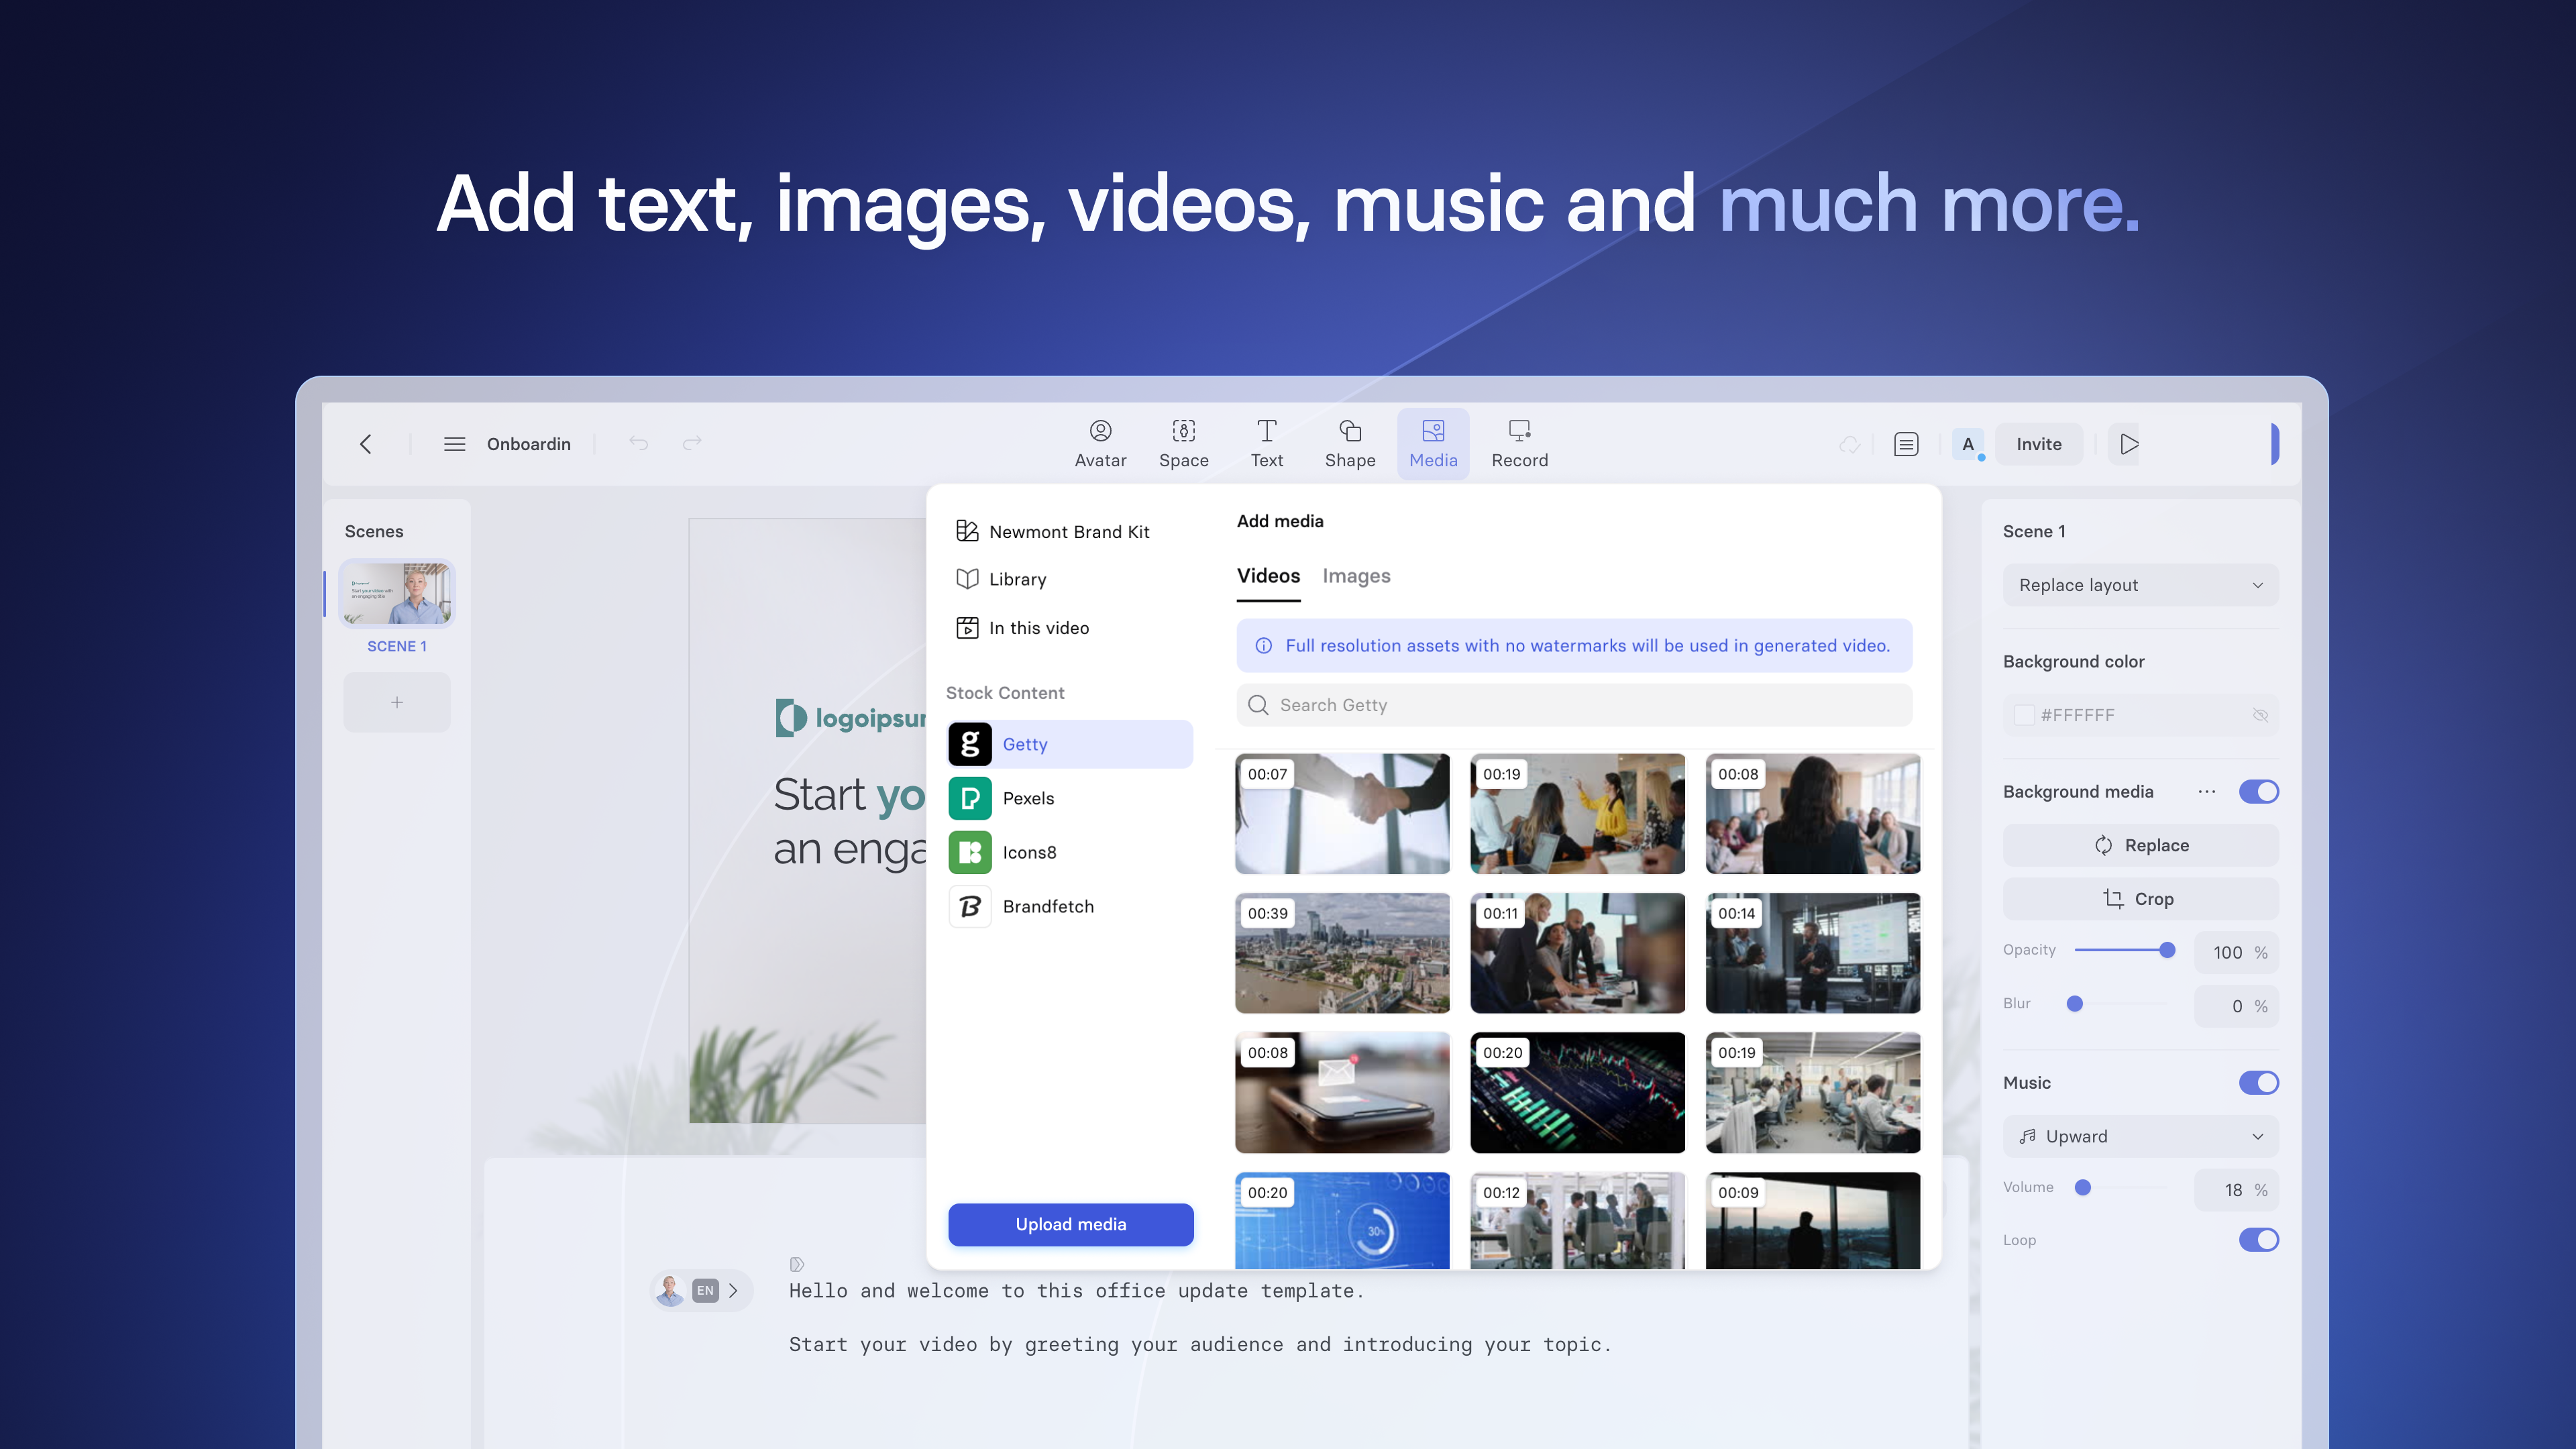 Add text, images, video, icons and design your video like a slide deck 🎨